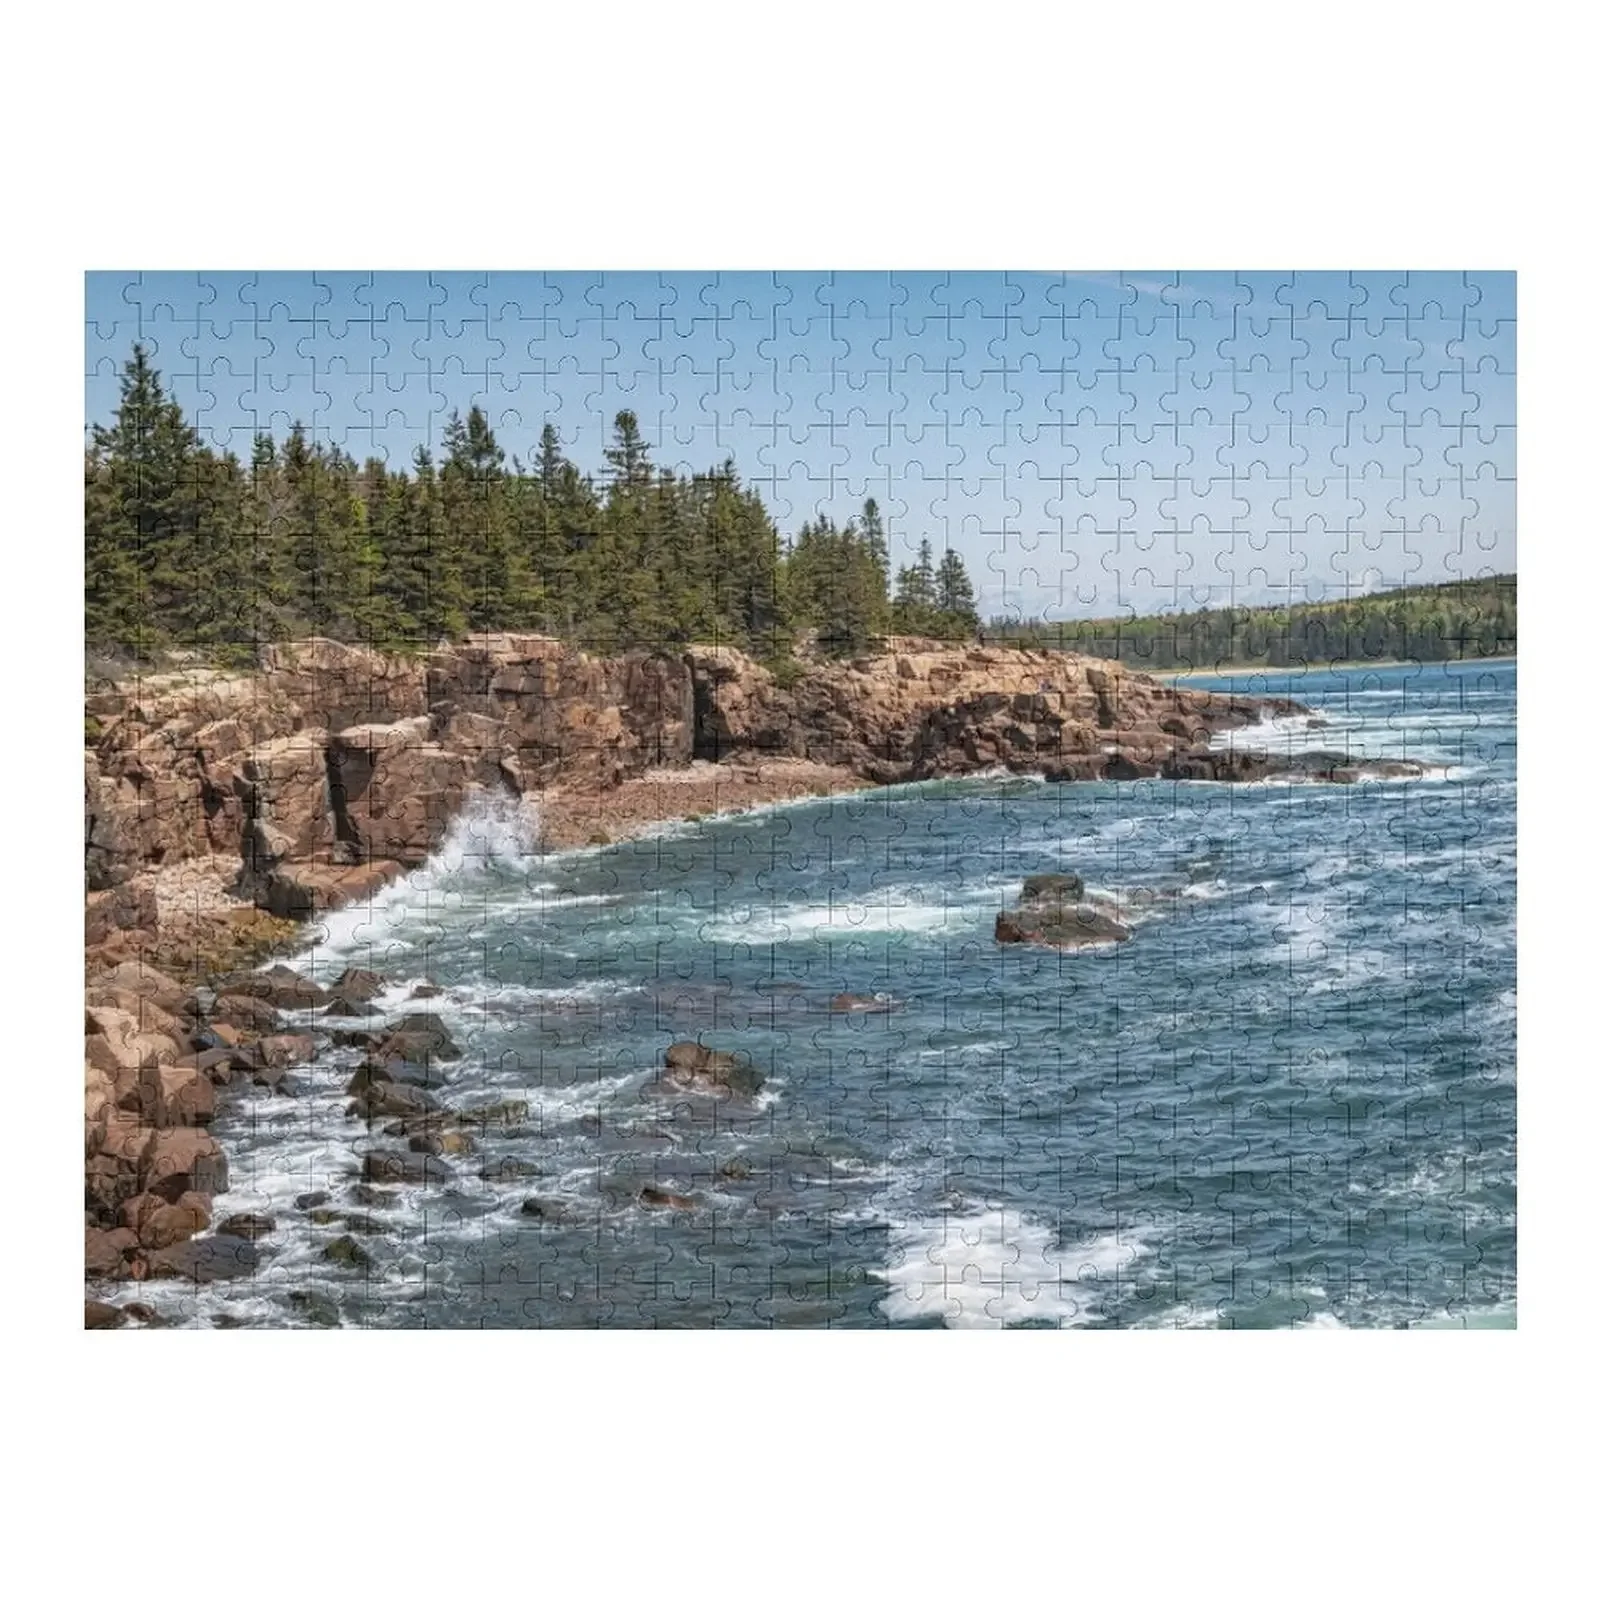 Maine Coastline Jigsaw Puzzle Personalised Customizeds For Kids Works Of Art Wooden Name Custom Personalized Puzzle san diego skyline at night jigsaw puzzle customizeds for kids personalised name puzzle